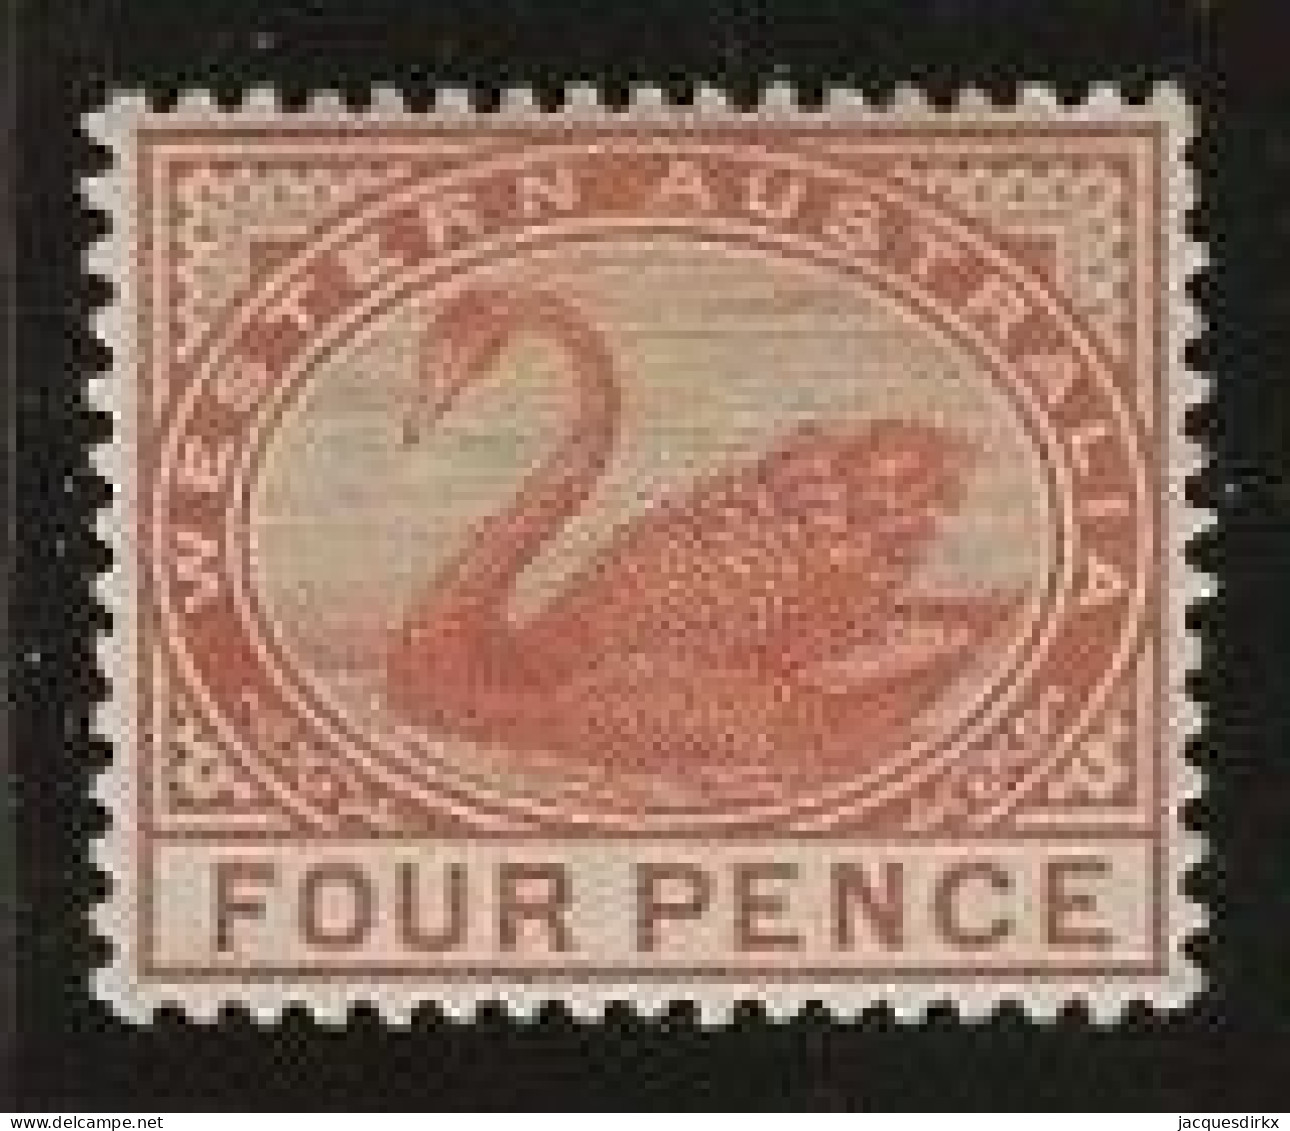 Western Australia     .   SG    .    98         .   *       .     Mint-hinged - Mint Stamps